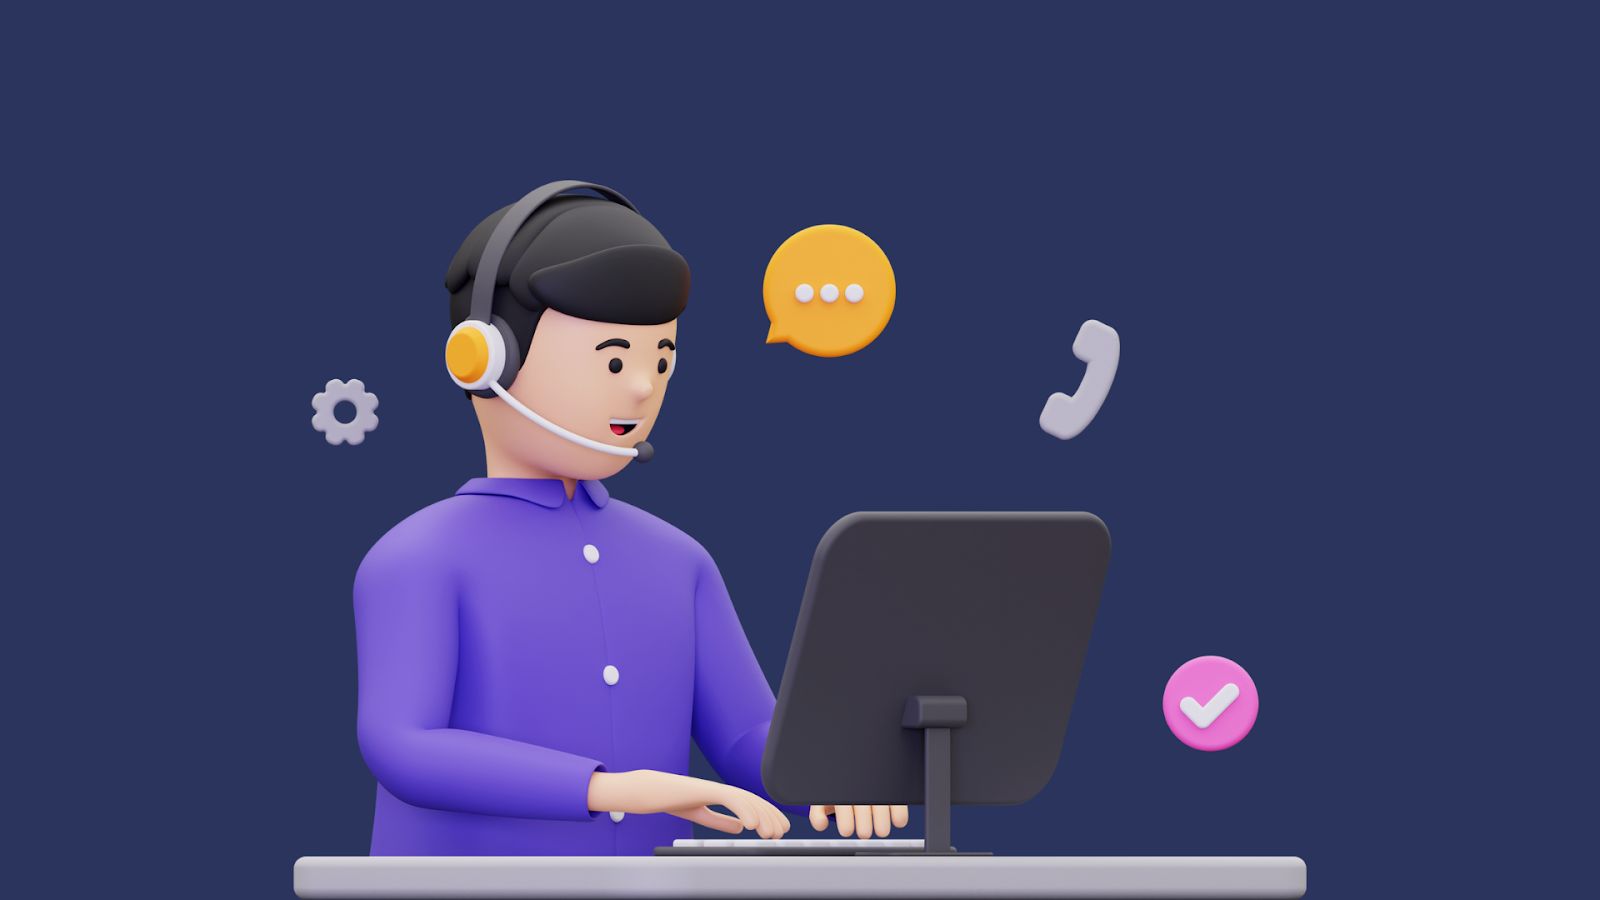 Customer service agent engaged in conversation, with icons representing validated communication, supported by Phone Number Validation technology.